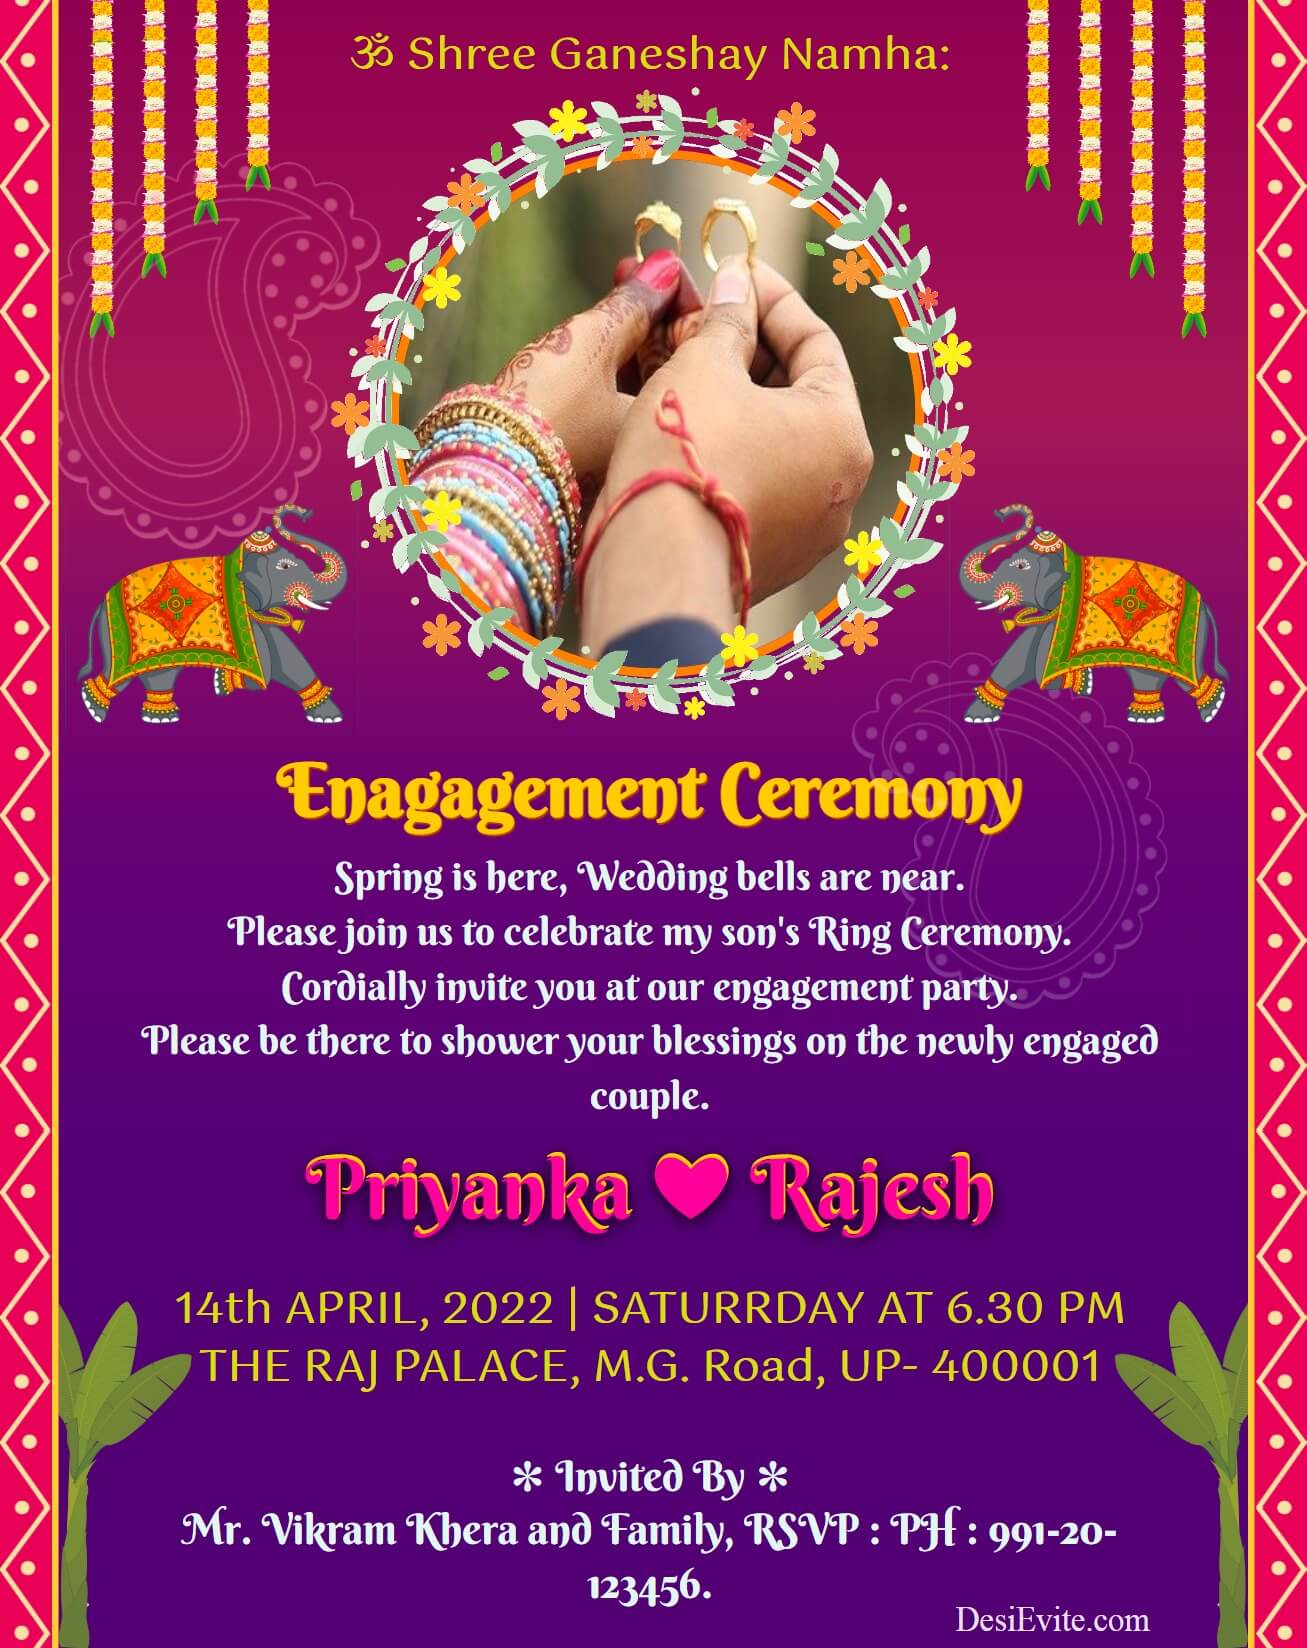 Its My Engagement Ceremony You are Invited